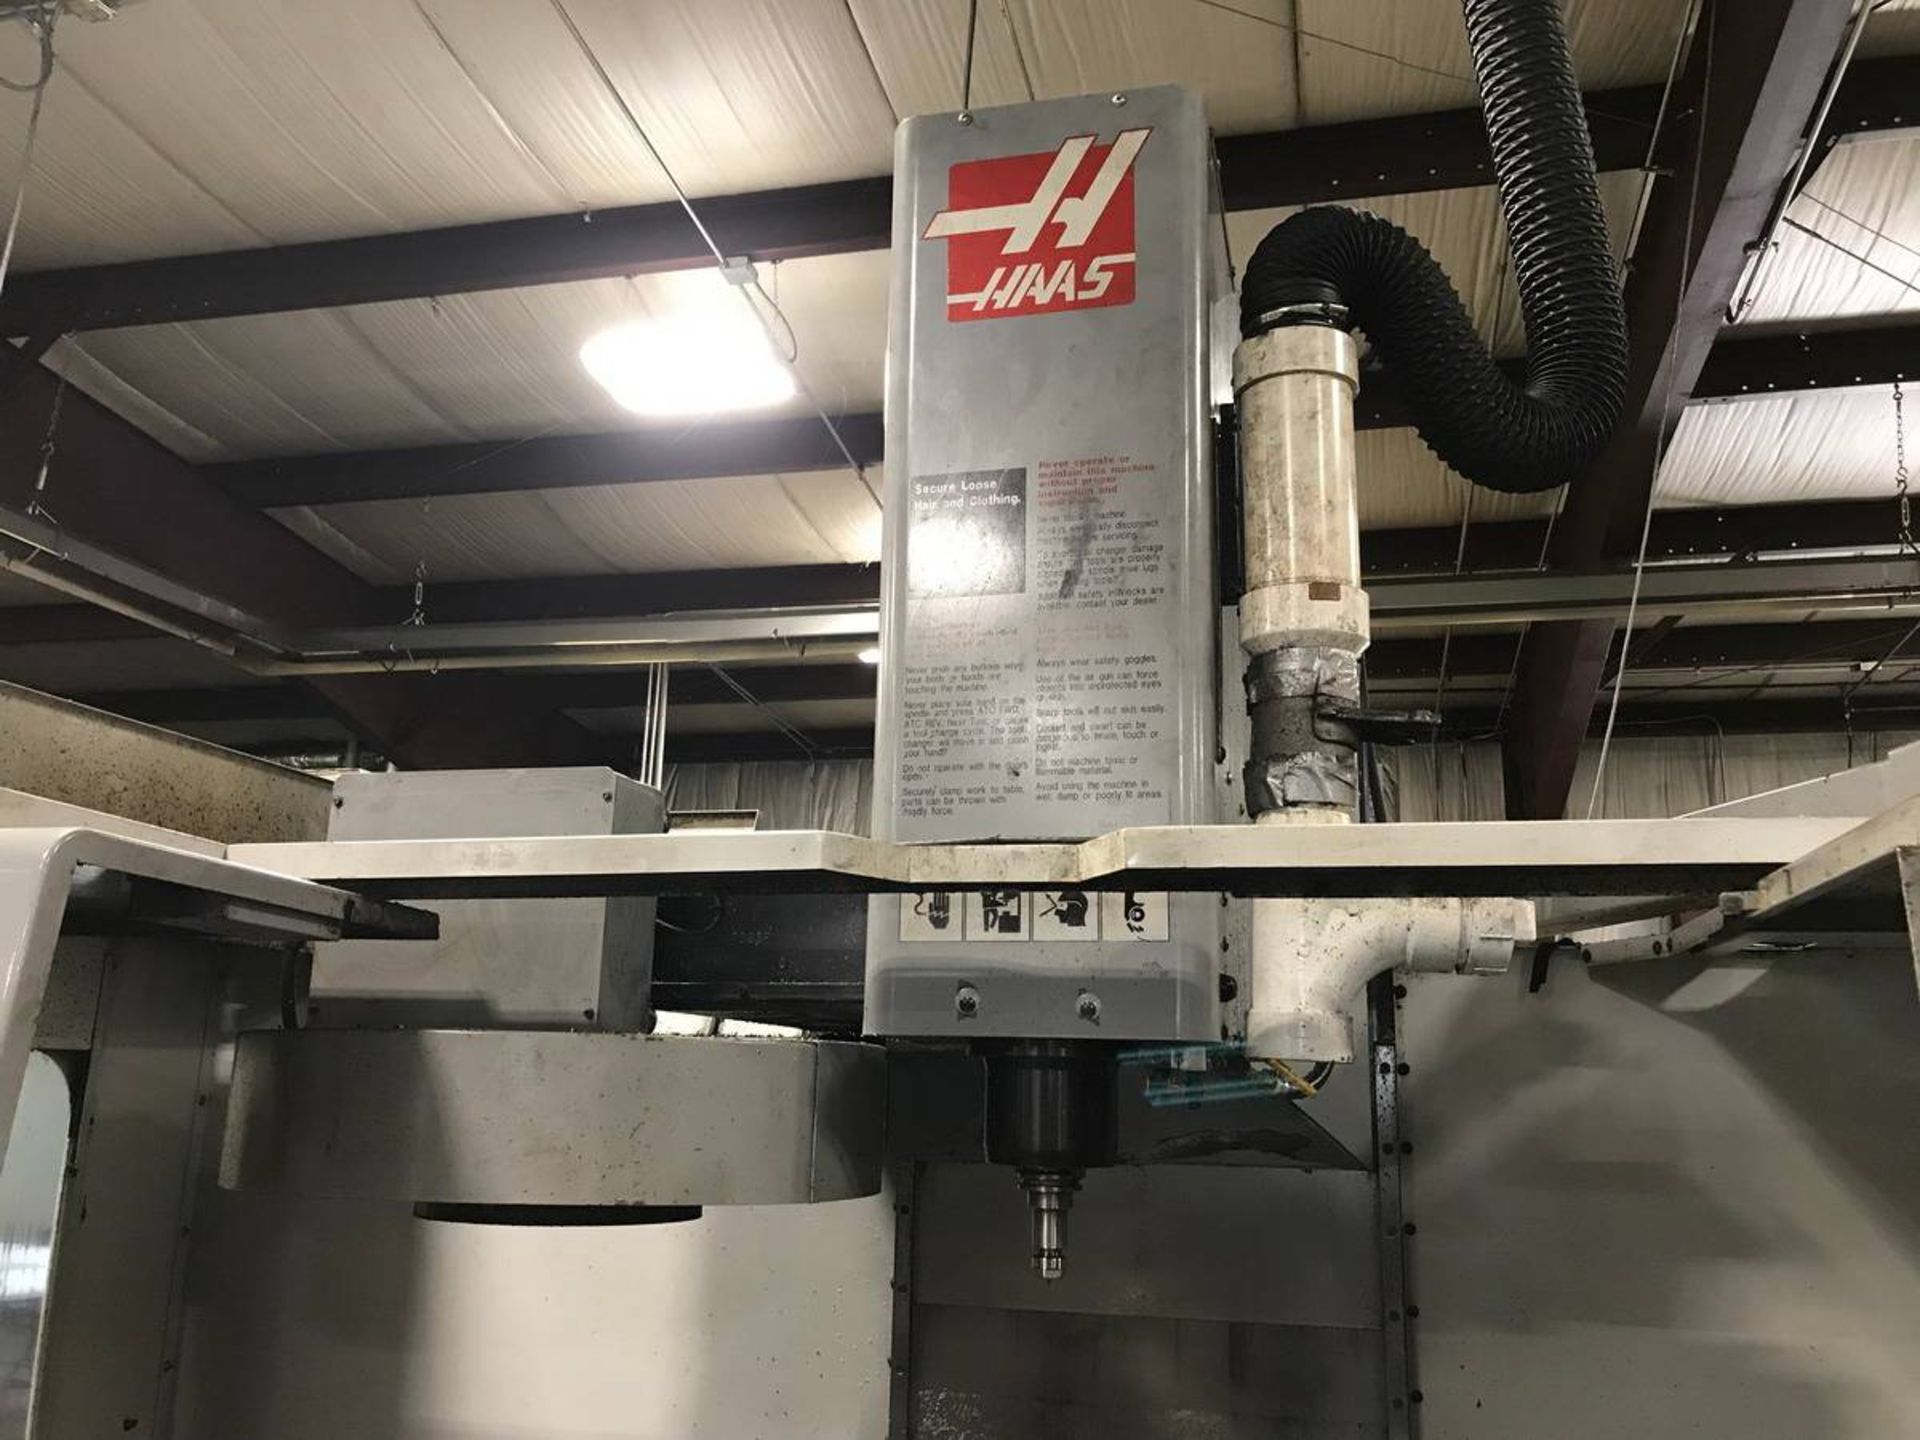 2005 HAAS VF-3BYT CNC Vertical Machine Center - Image 5 of 9